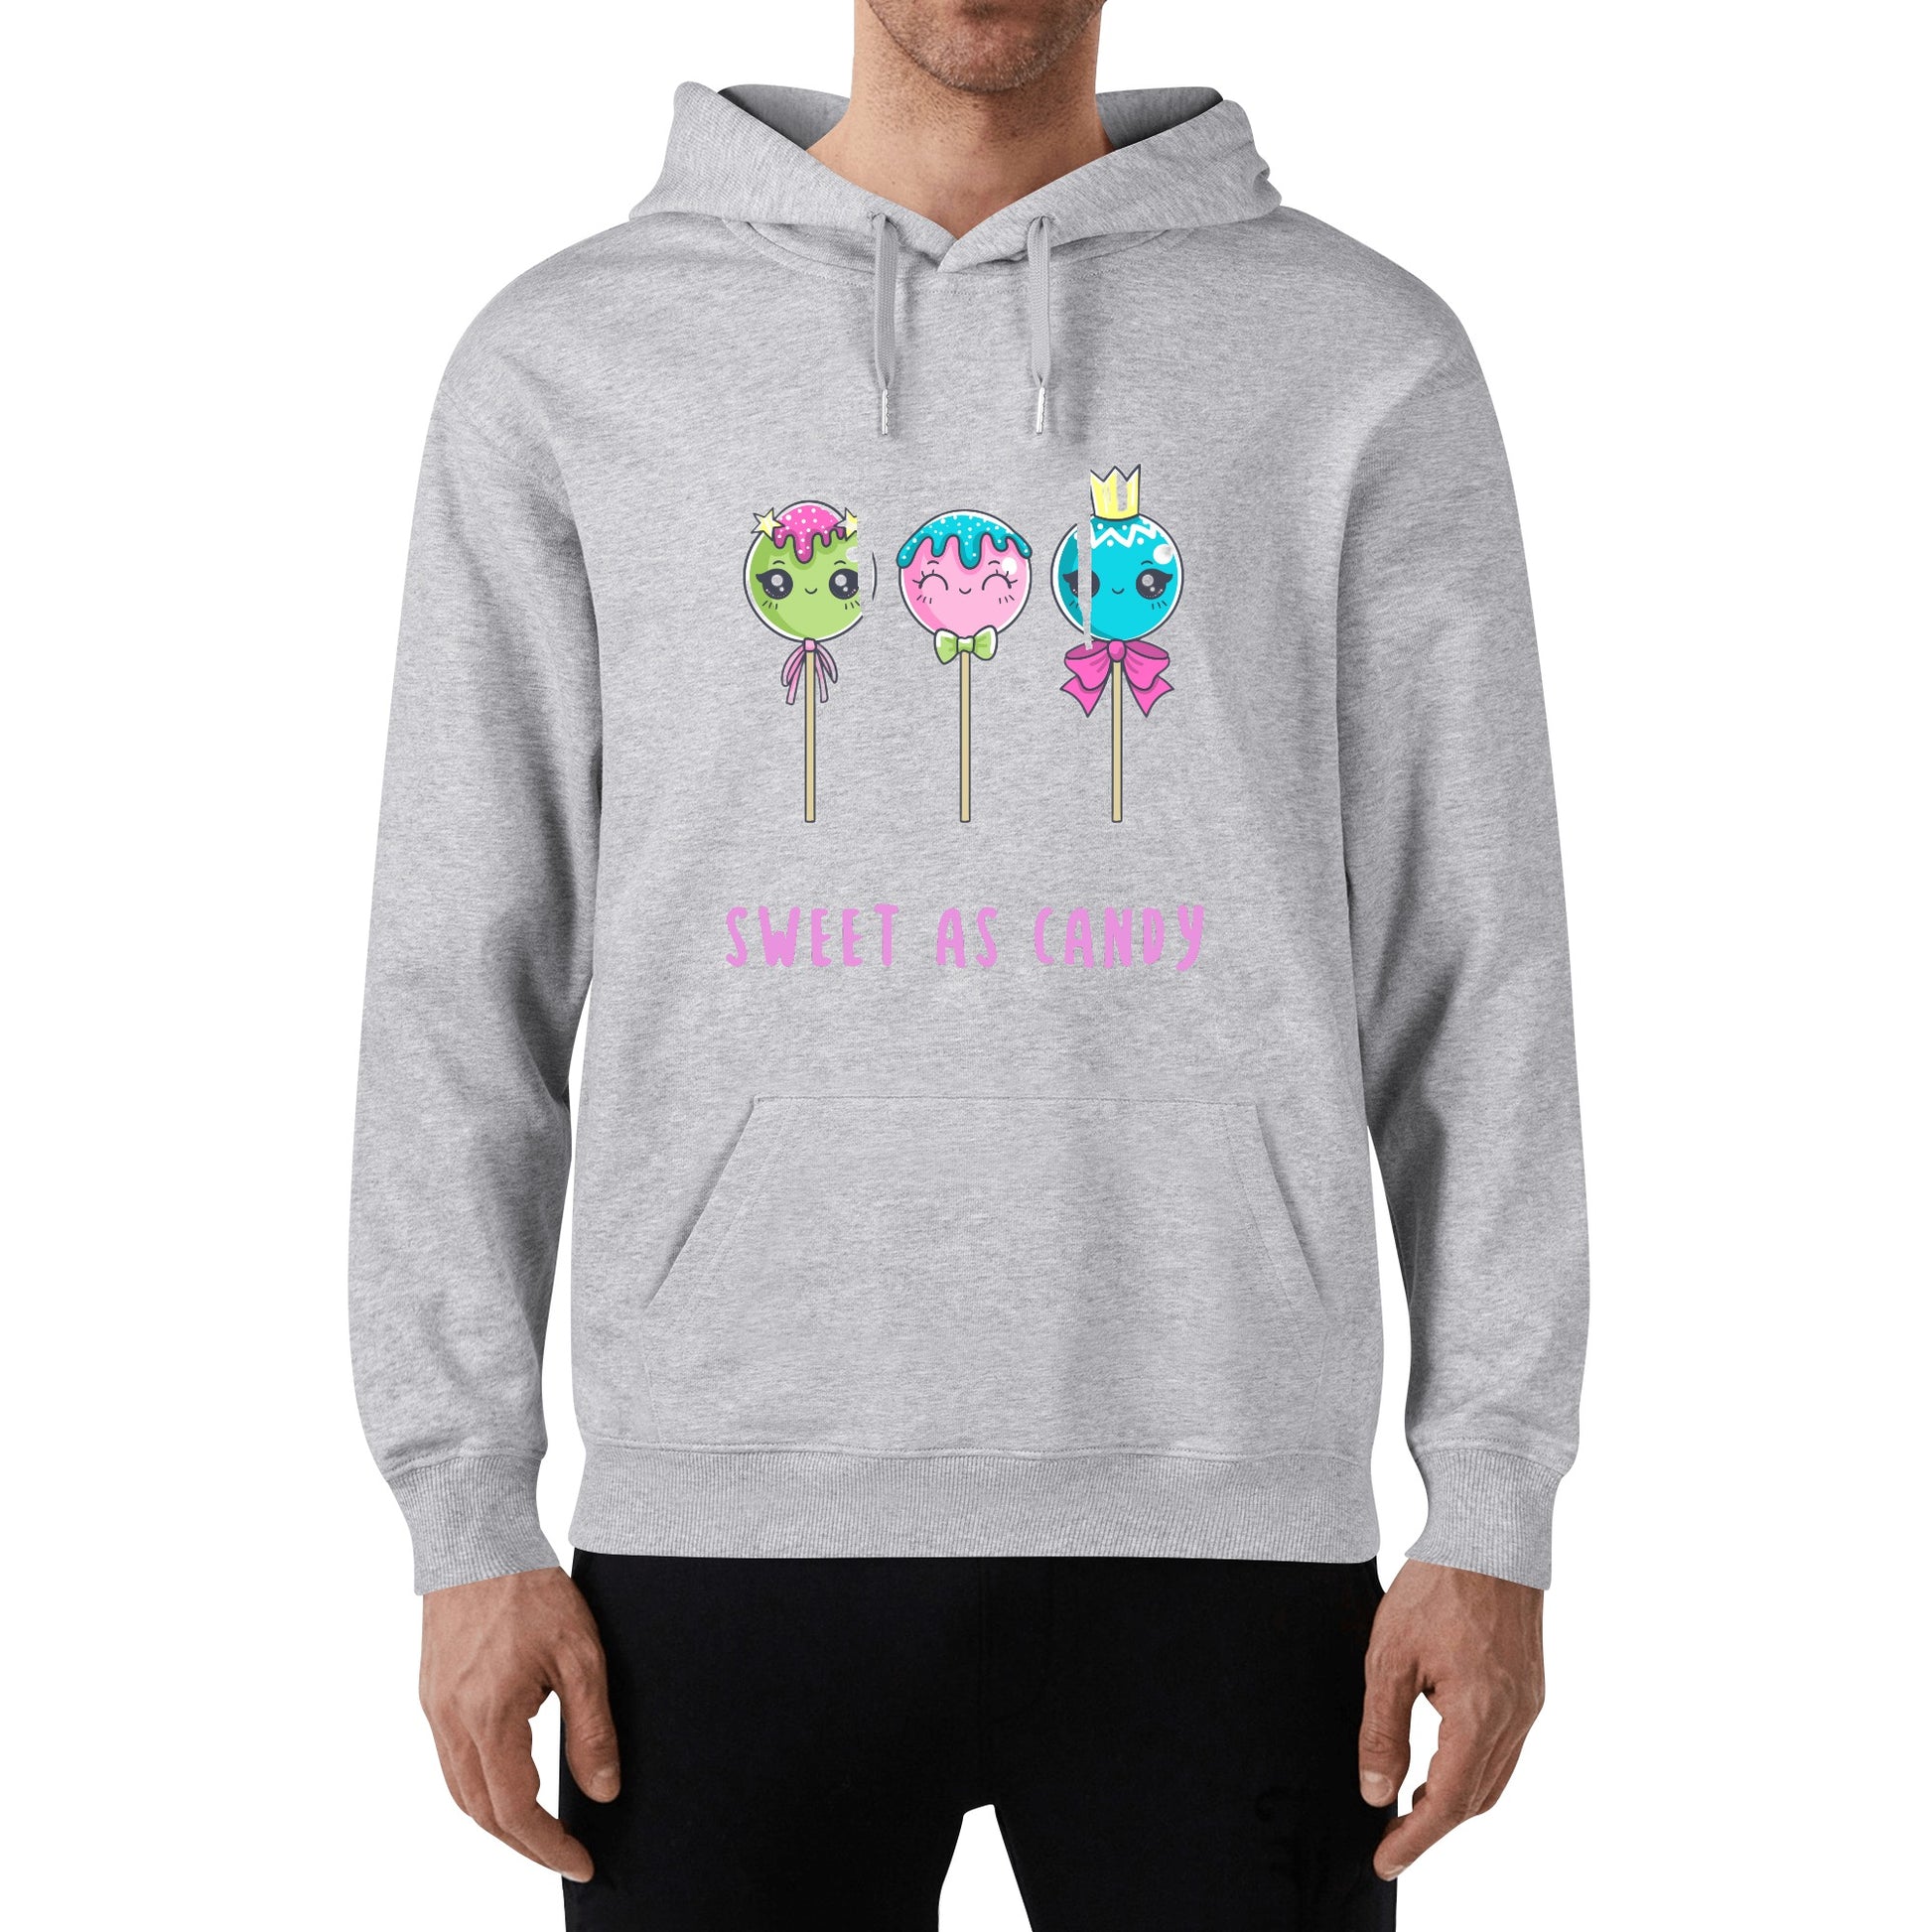 "Sweet as Candy" Adult Cotton Hoodie. Cute candy print